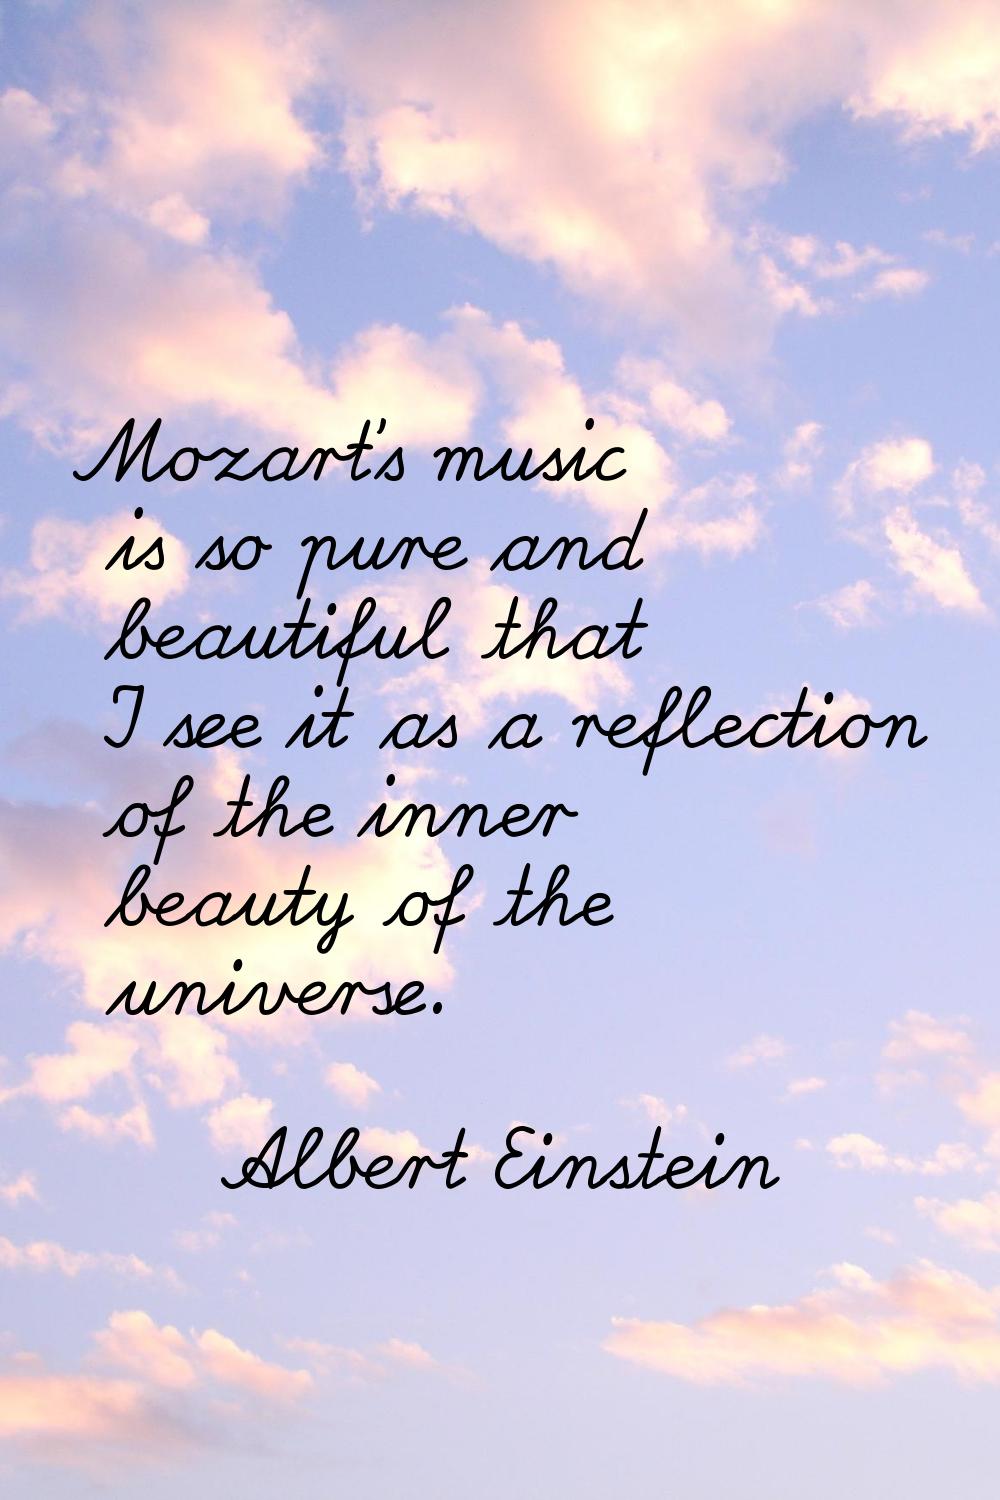 Mozart's music is so pure and beautiful that I see it as a reflection of the inner beauty of the un